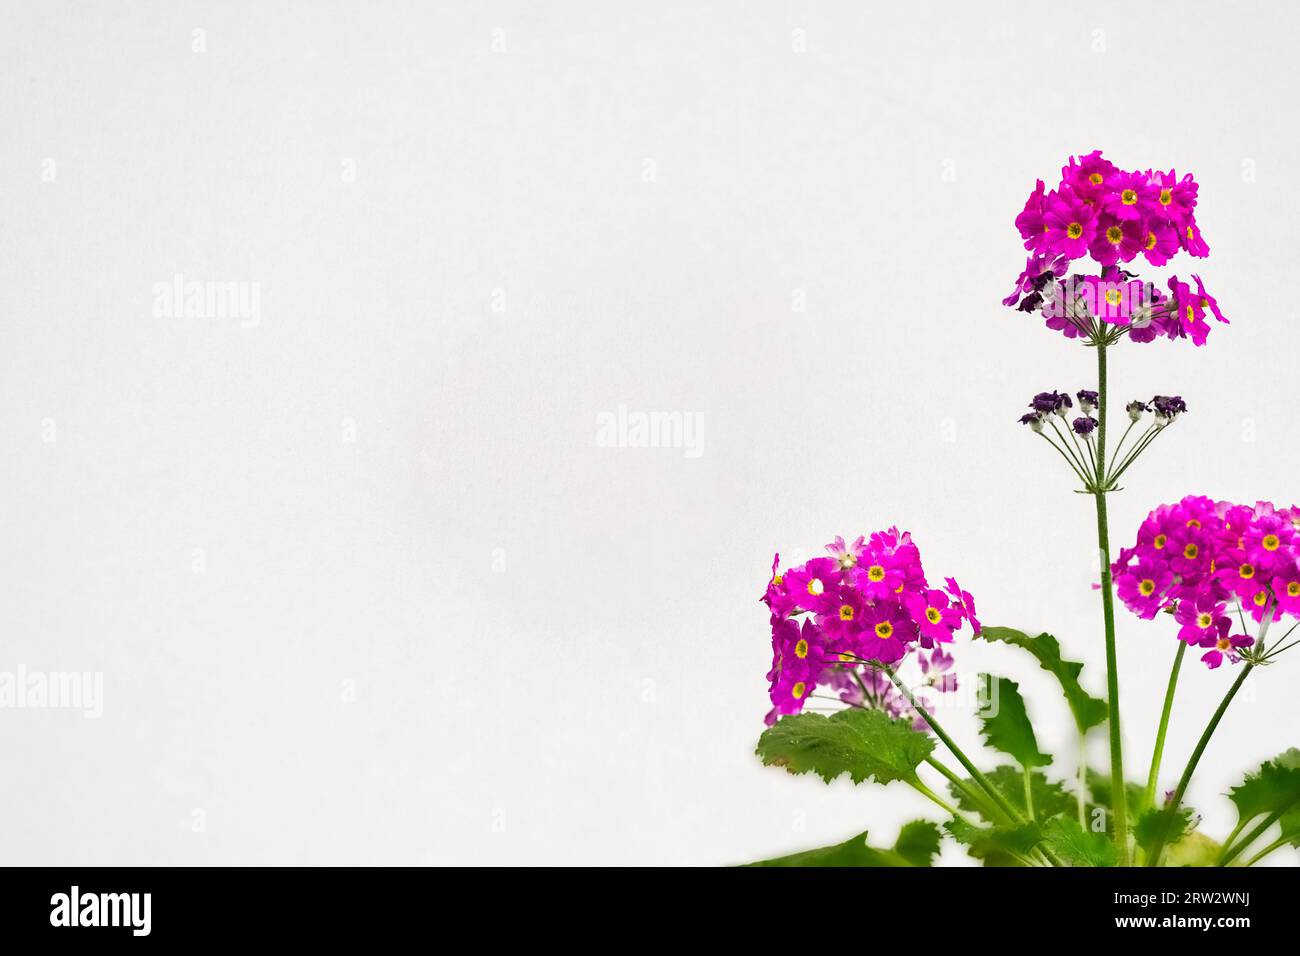 A close-up photograph of Fairy Primrose (Primula malacoides) against an isolated white background in stock photos. Space is available for text, symbol Stock Photo